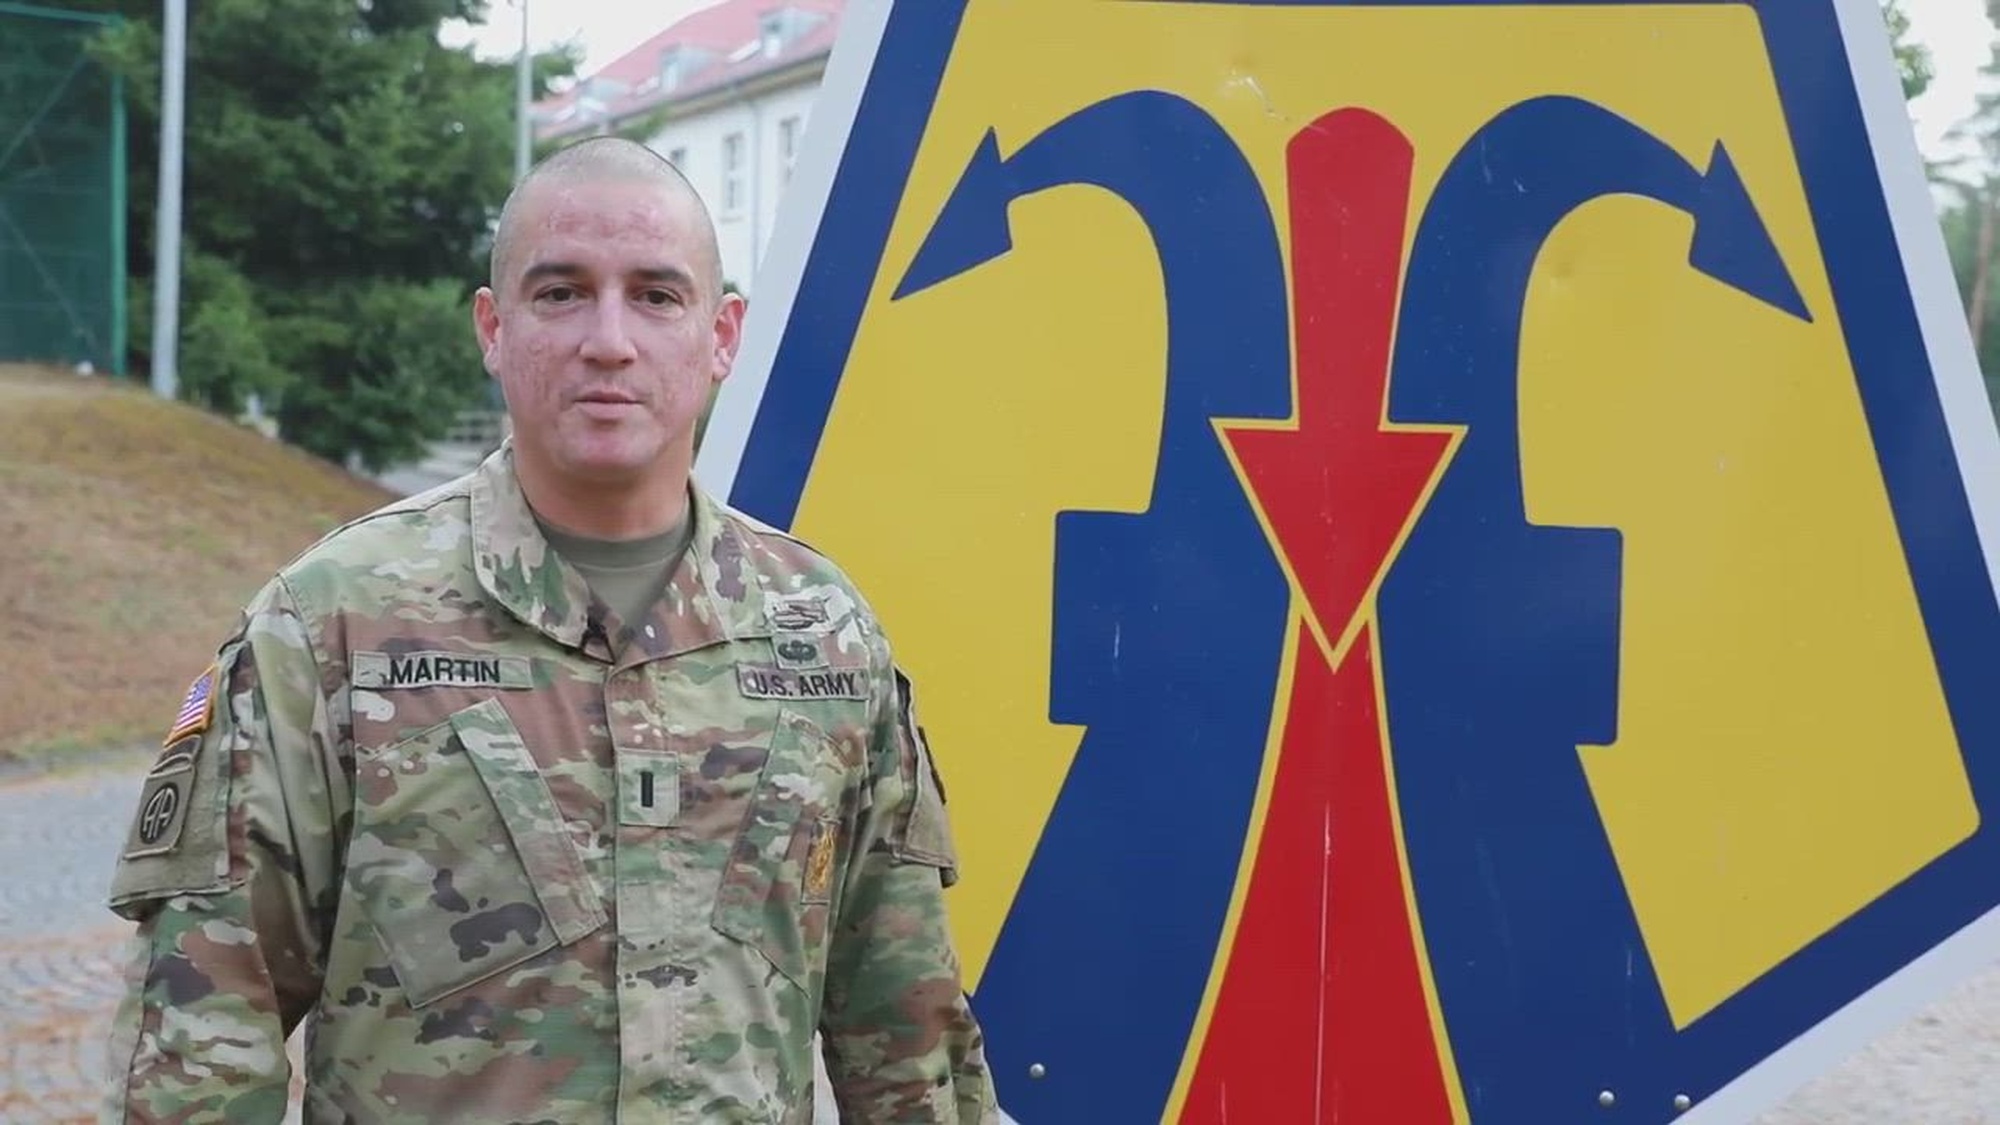 1st Lt. Amed Martin shares a message with the force recognizing and celebrating Hispanic Heritage Month from the 7th Mission Support Command, Kaiserslautern, Germany